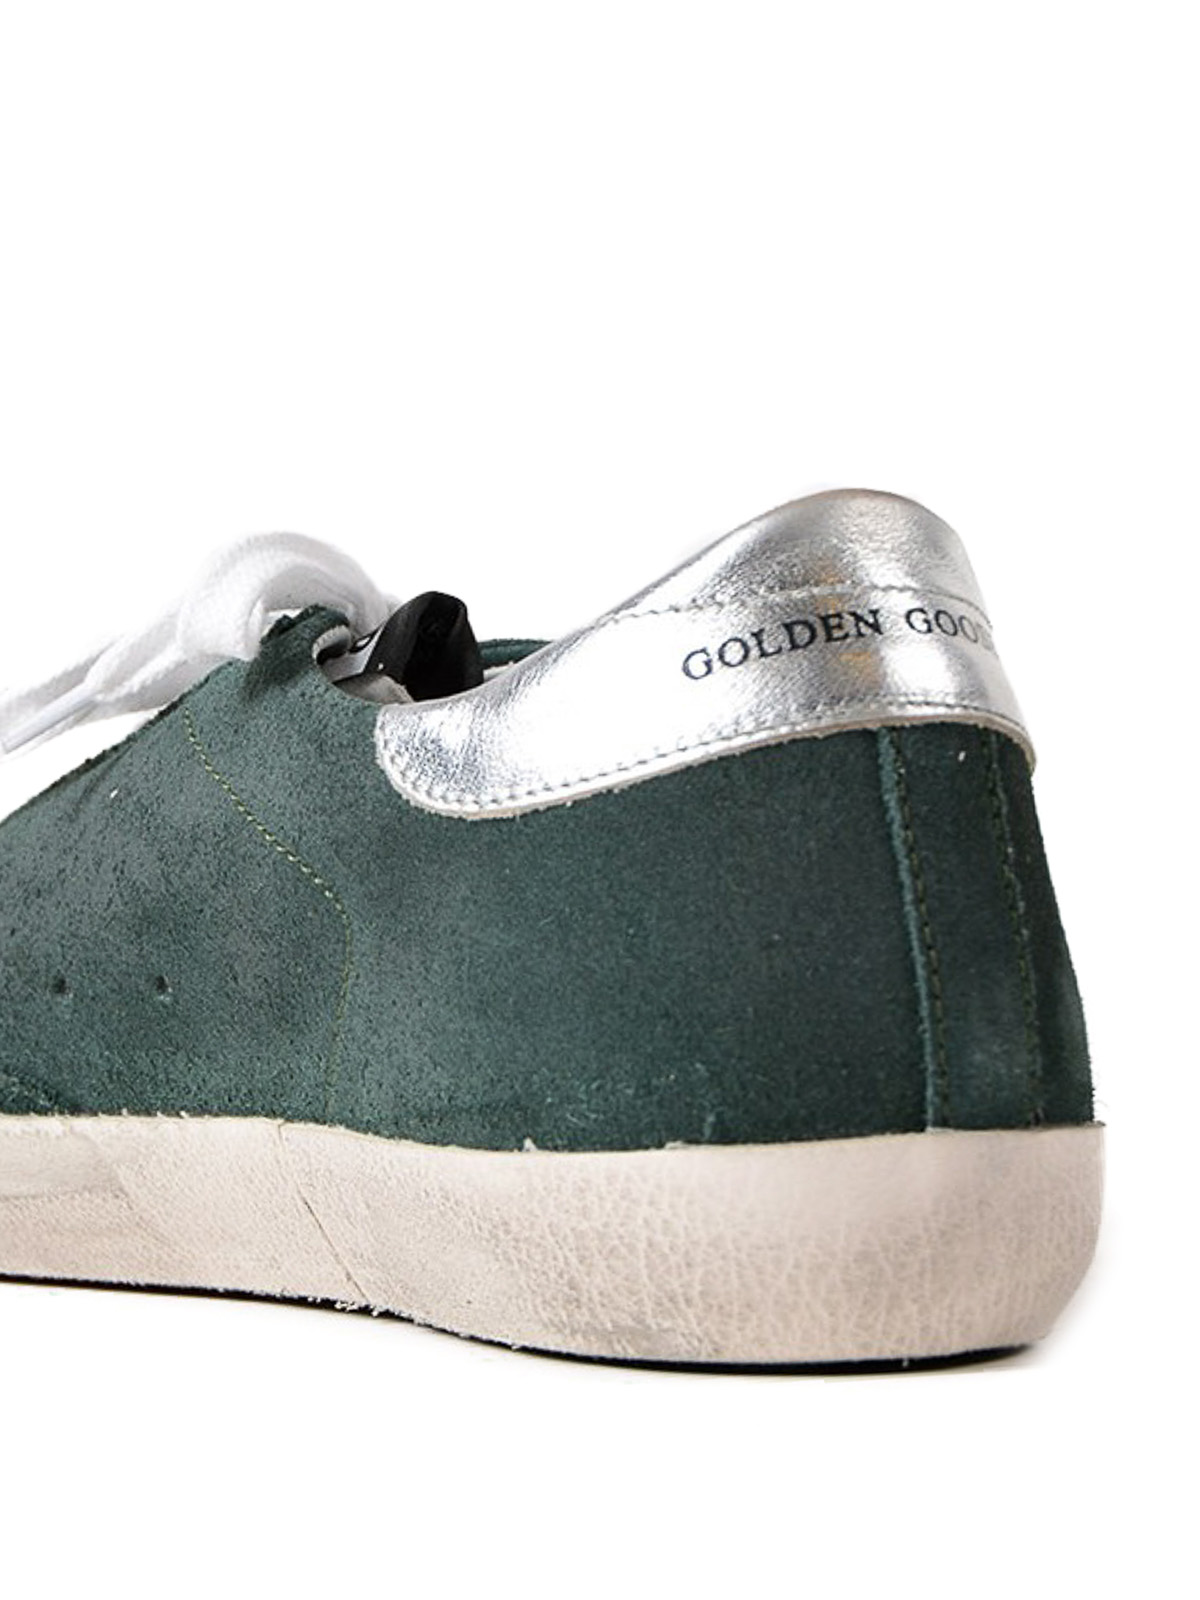 green suede trainers